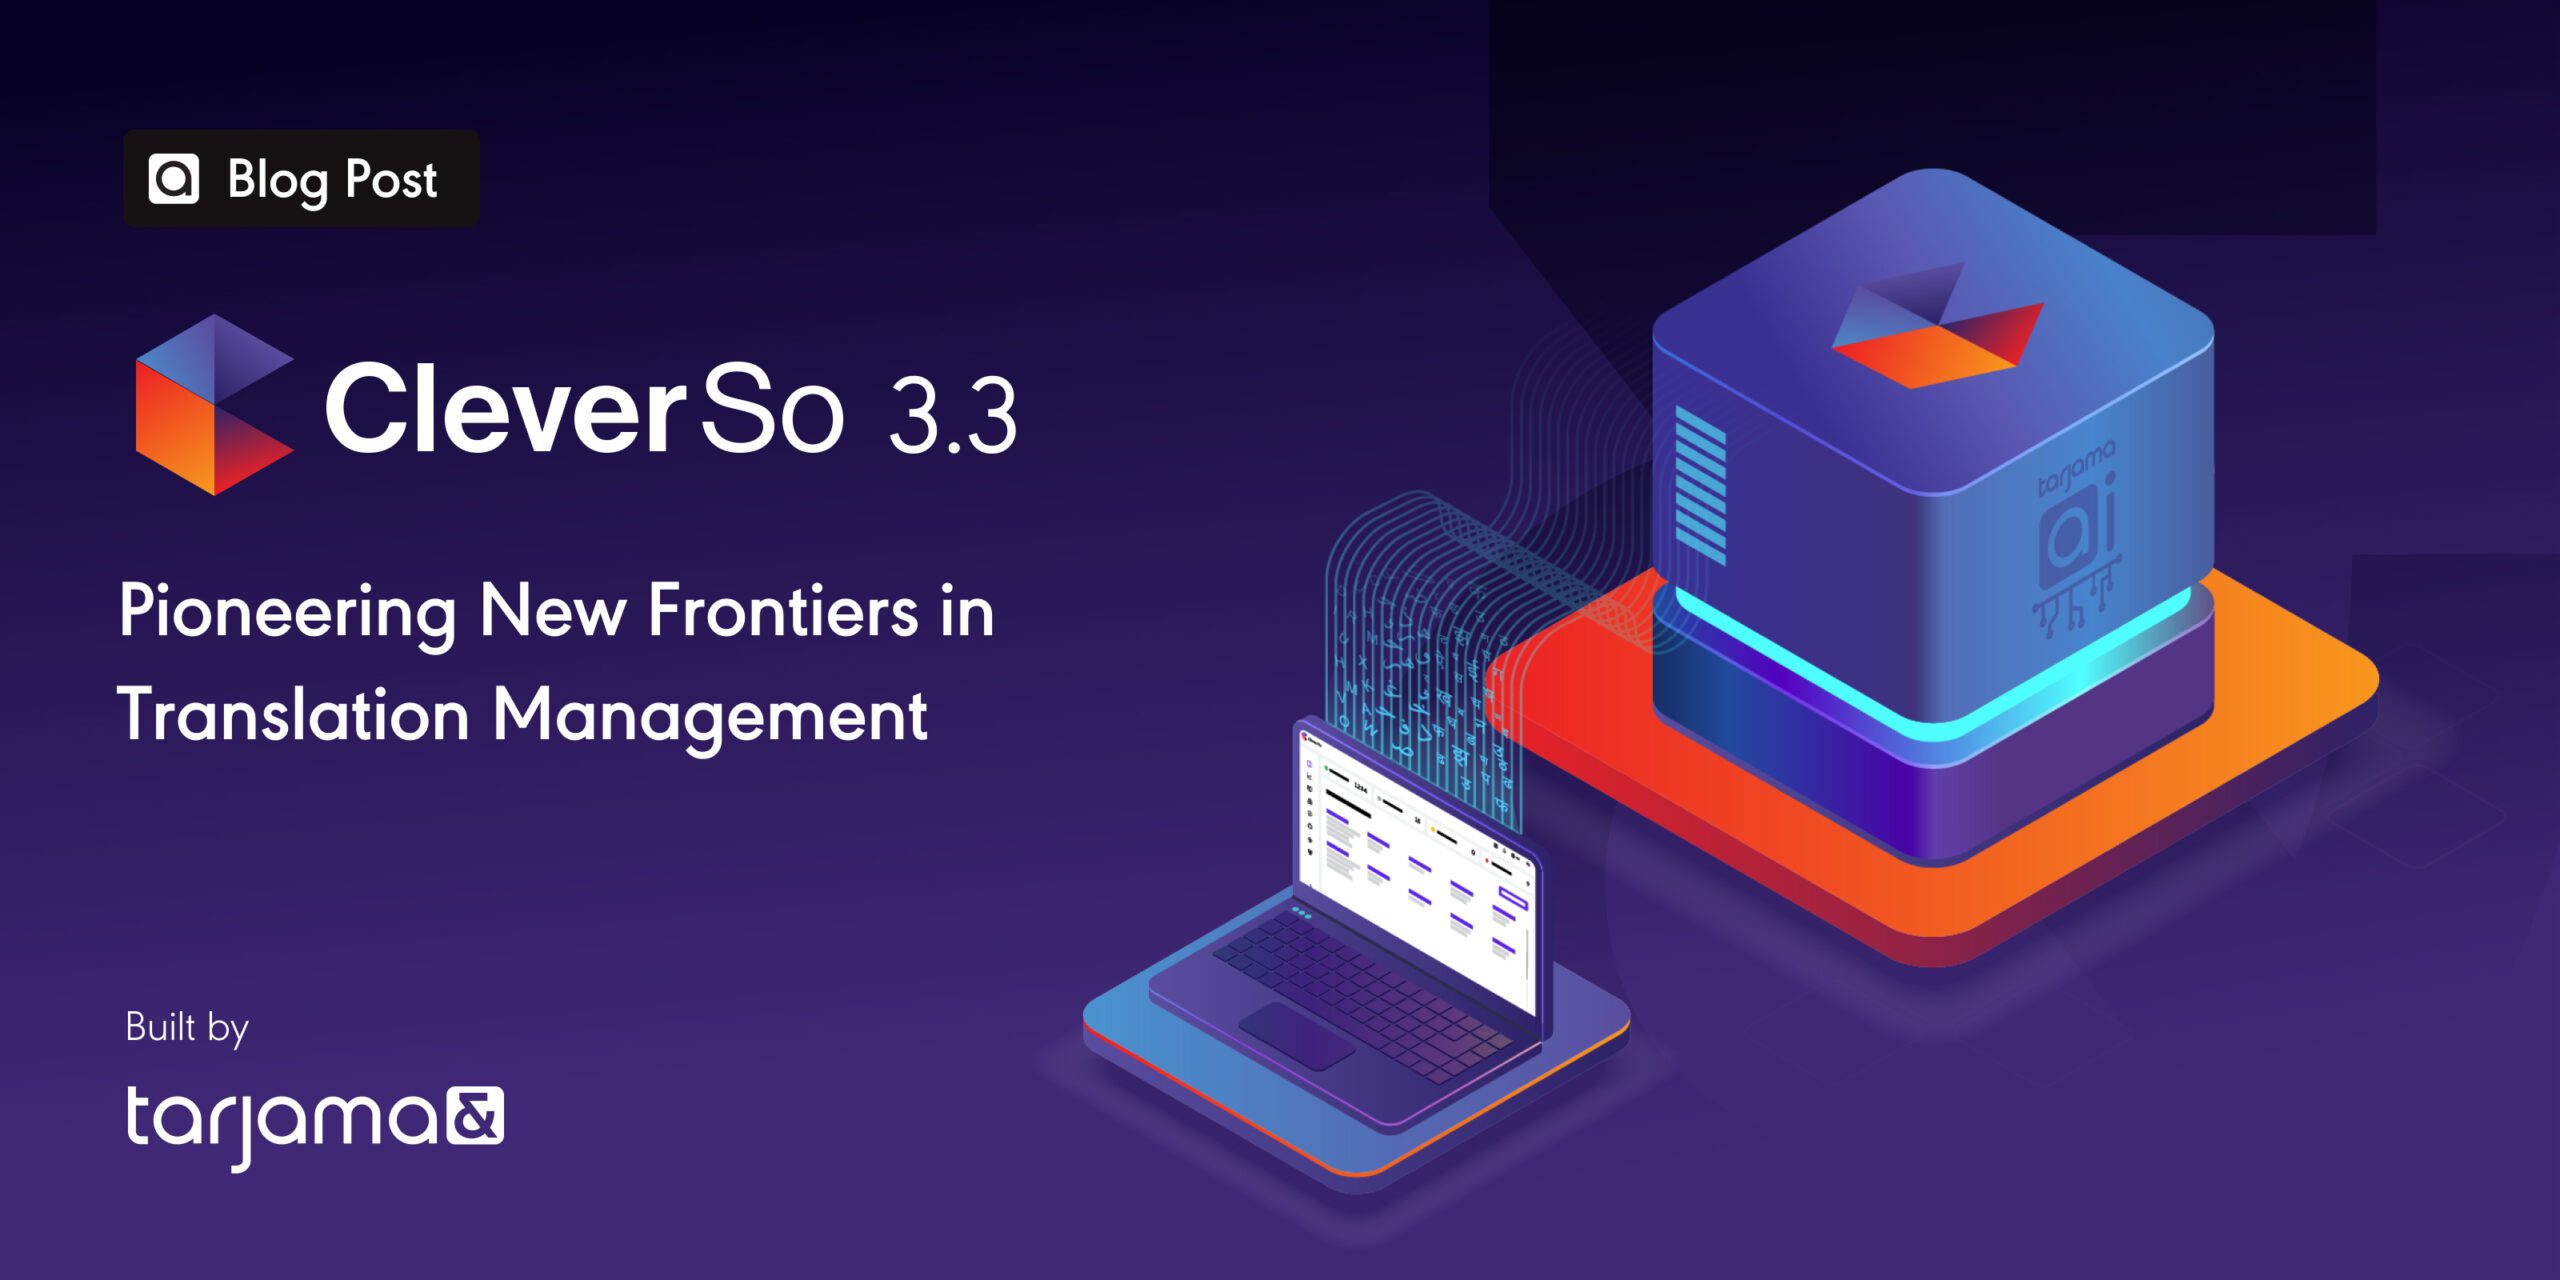 CleverSo 3.3.0: Pioneering New Frontiers in Translation Management